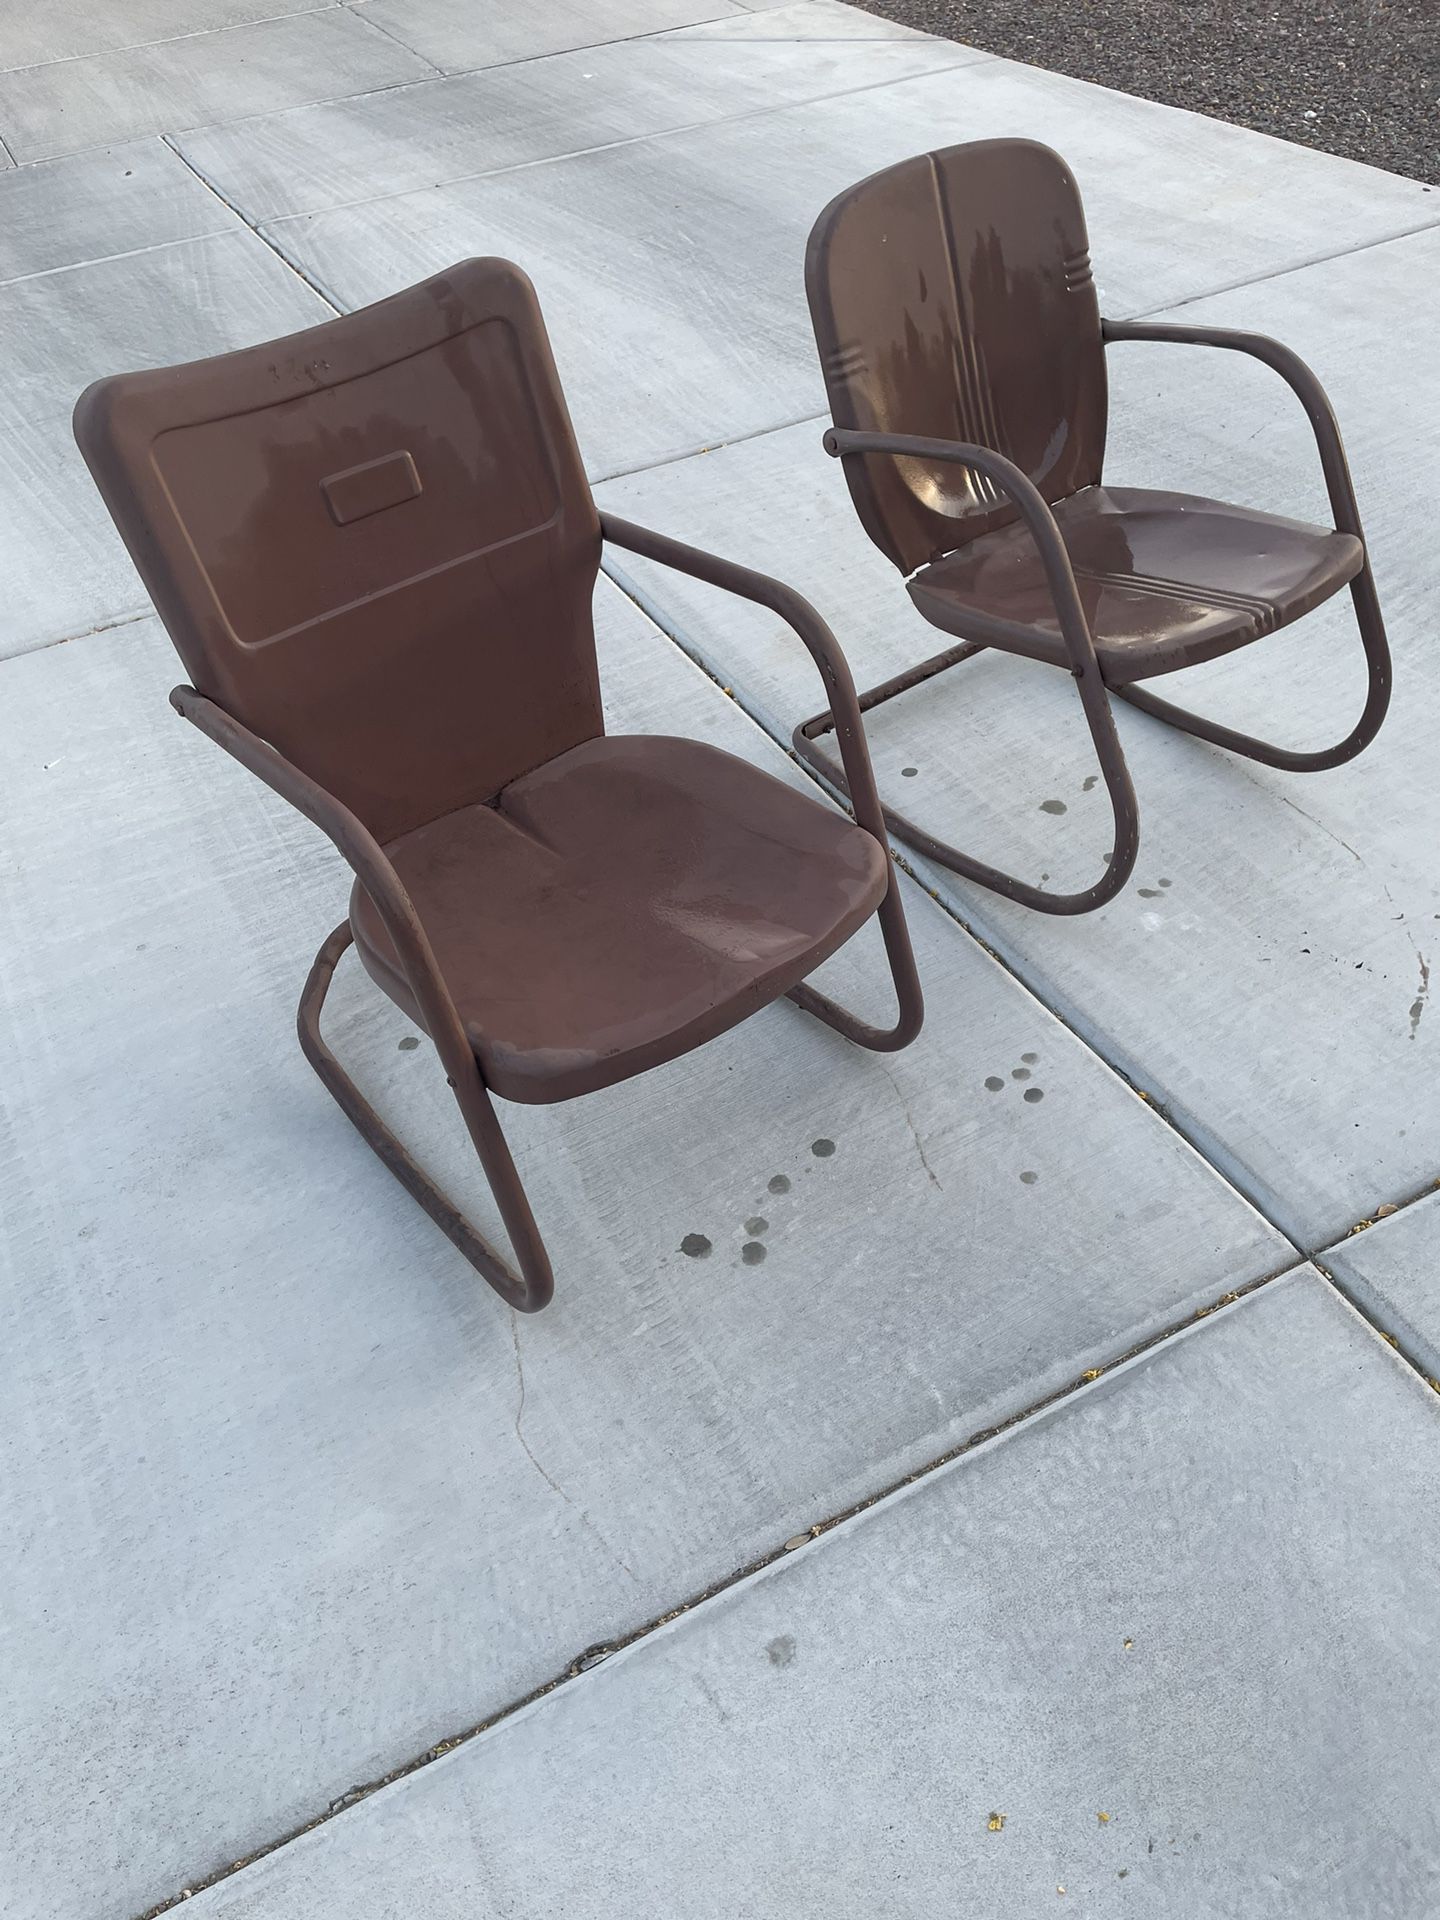 Pair Of Mid Century Metal Hotel / Motel Chairs 